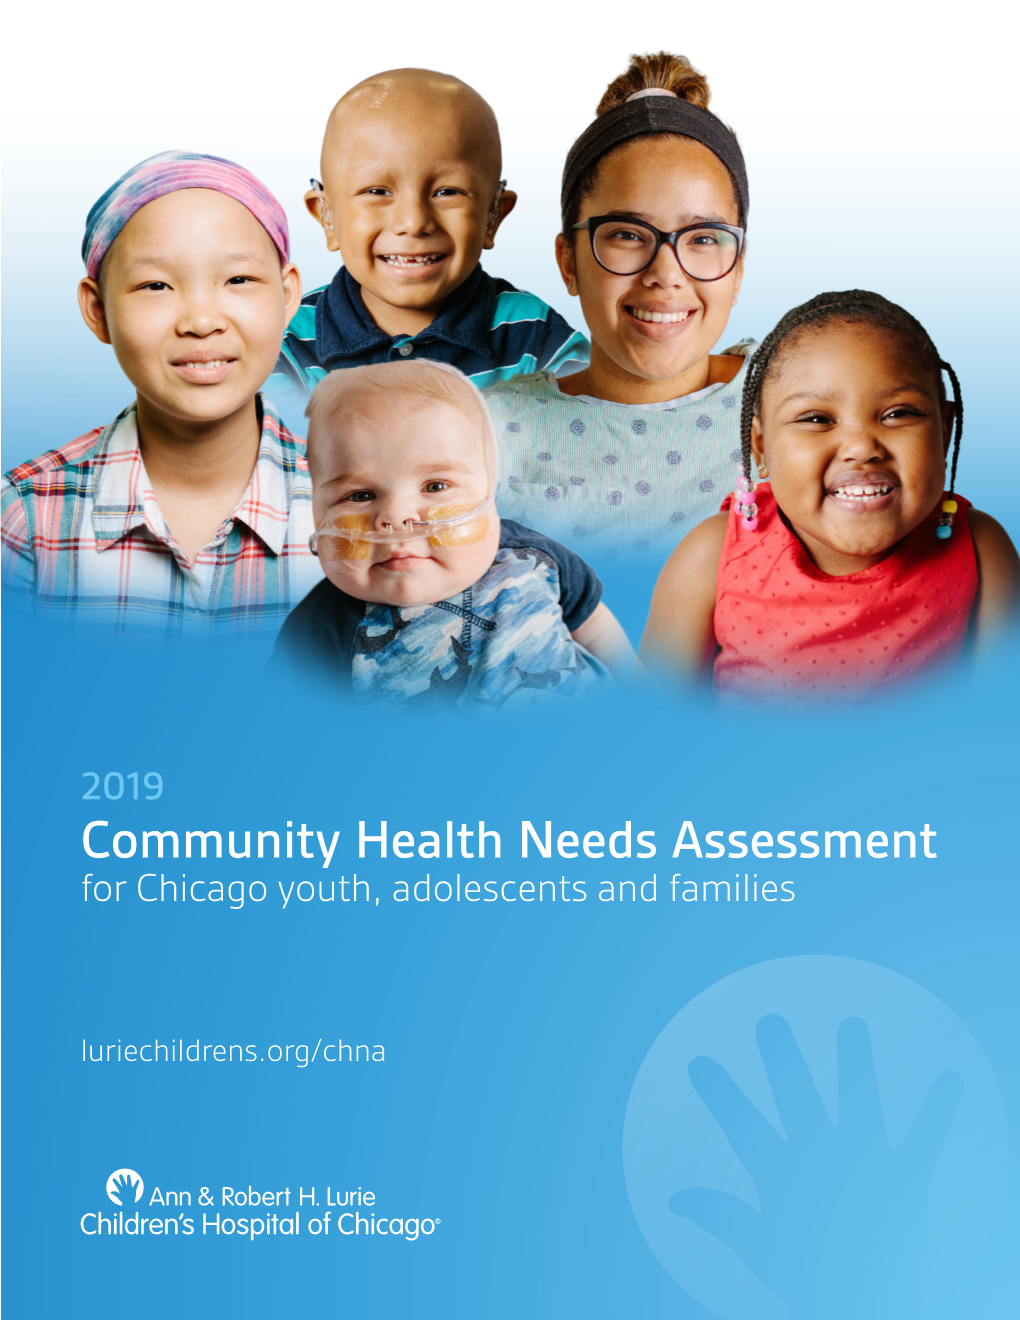 Community Health Needs Assessment for Chicago Youth, Adolescents and Families